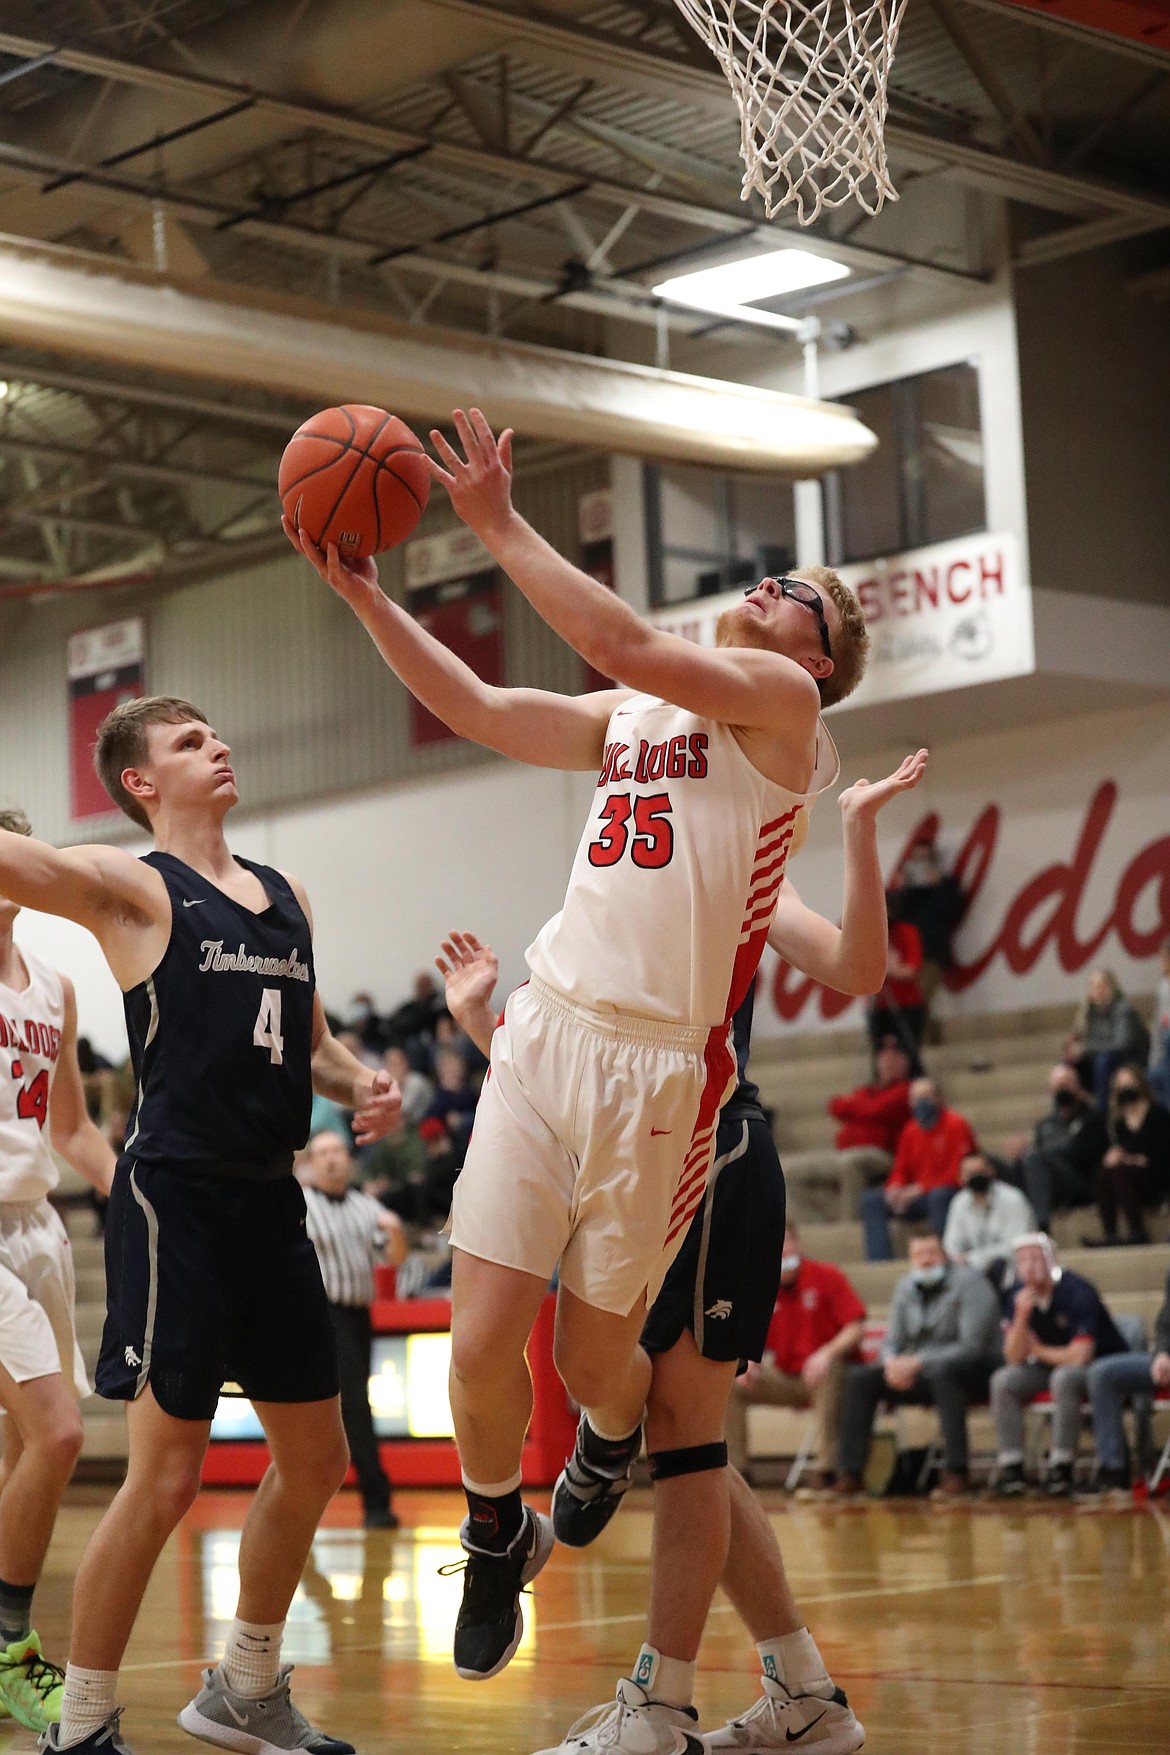 Junior Ethan Butler splits a pair of Lake City defenders and attempts a contested layup on Tuesday.